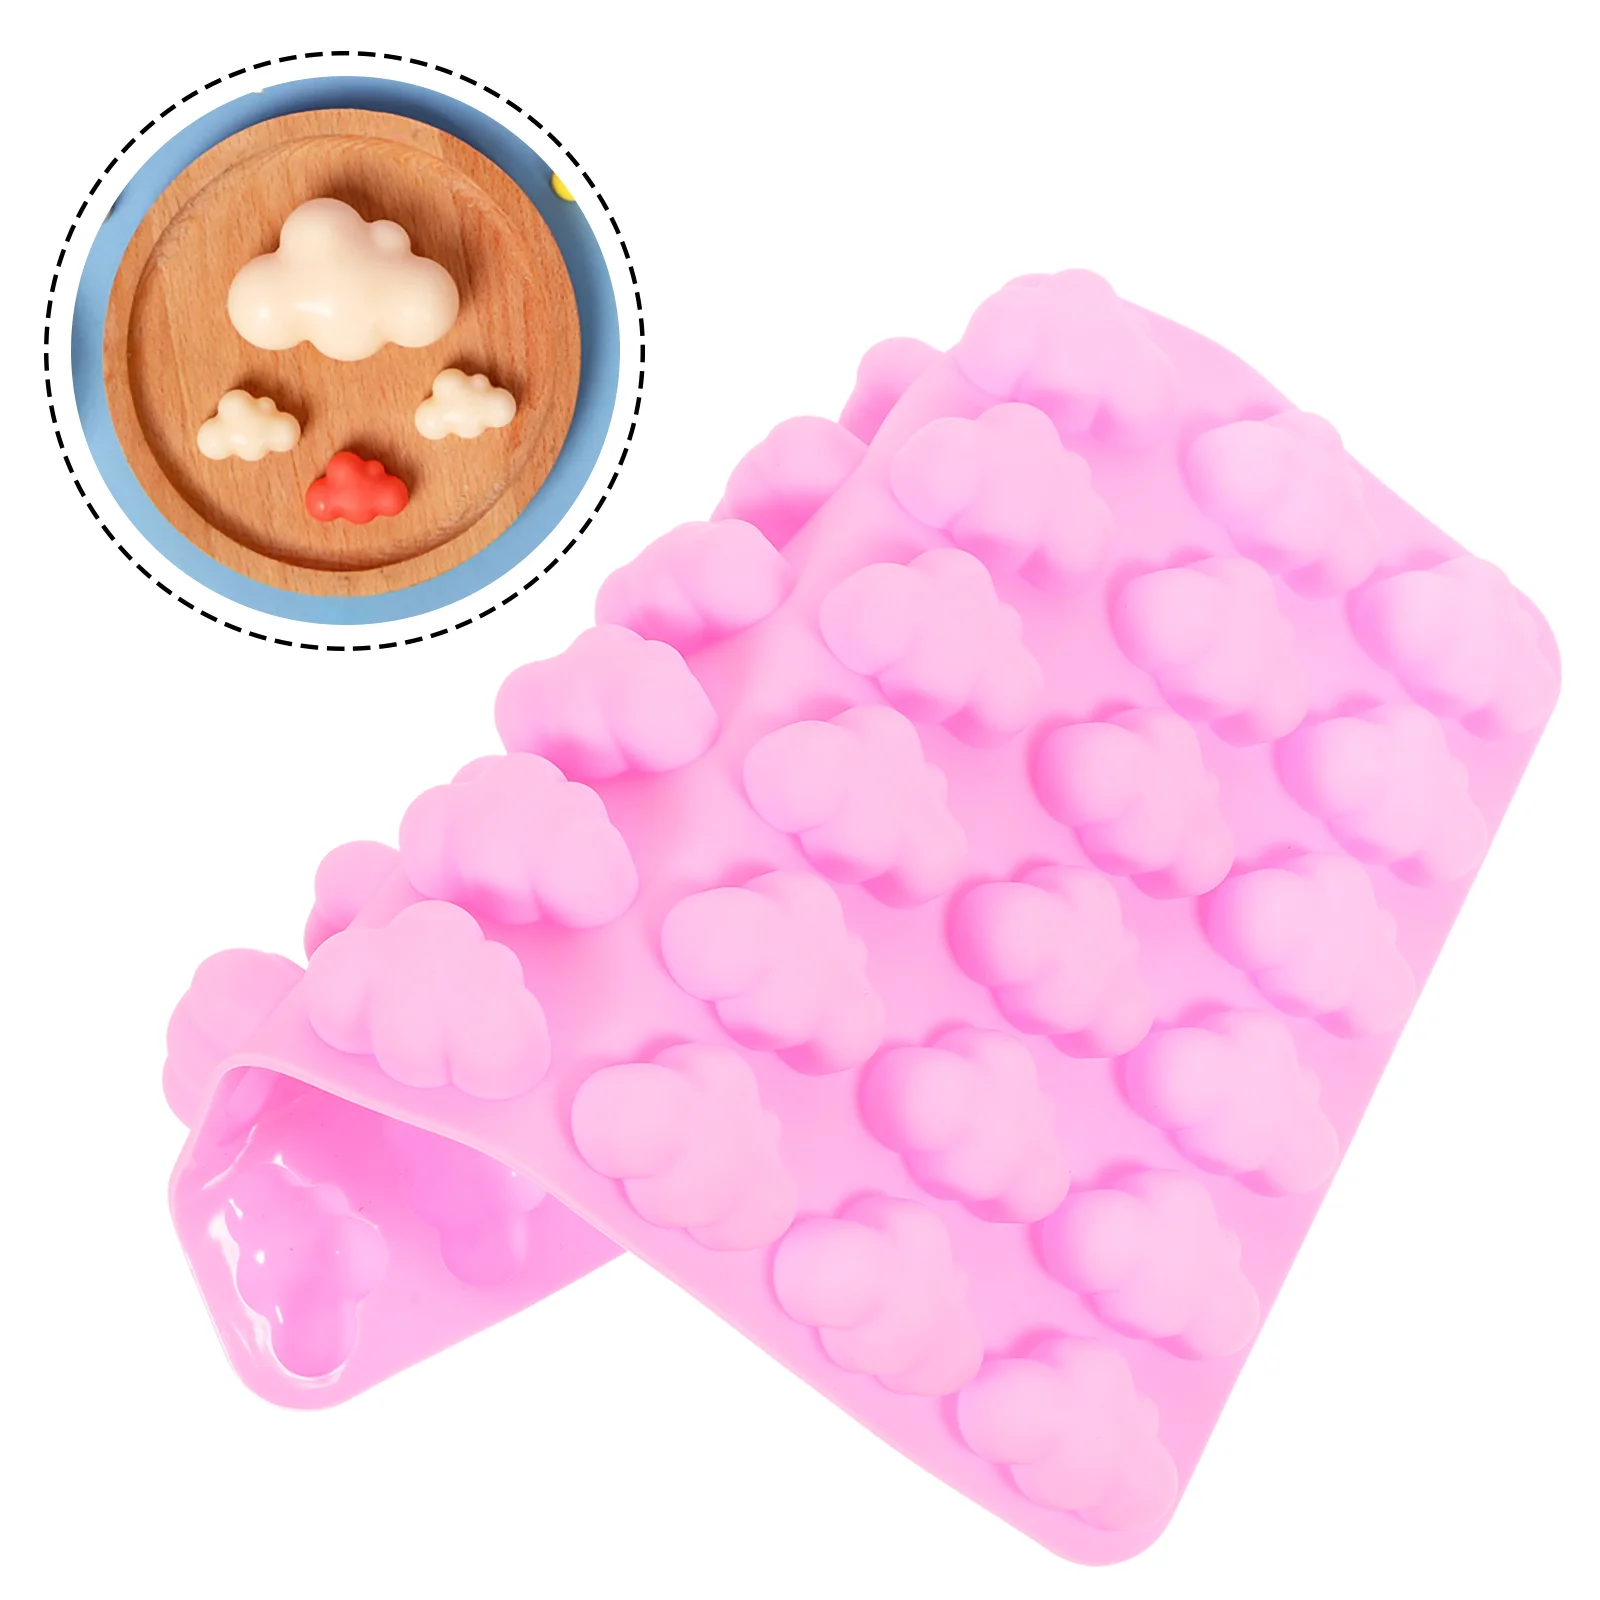 

Mold Molds Silicone Cake Moulds Baking Chocolate Cloudcandy Mould Jelly Mousse Cookie Cupcake Tool Pudding Cloudsresin Epoxy